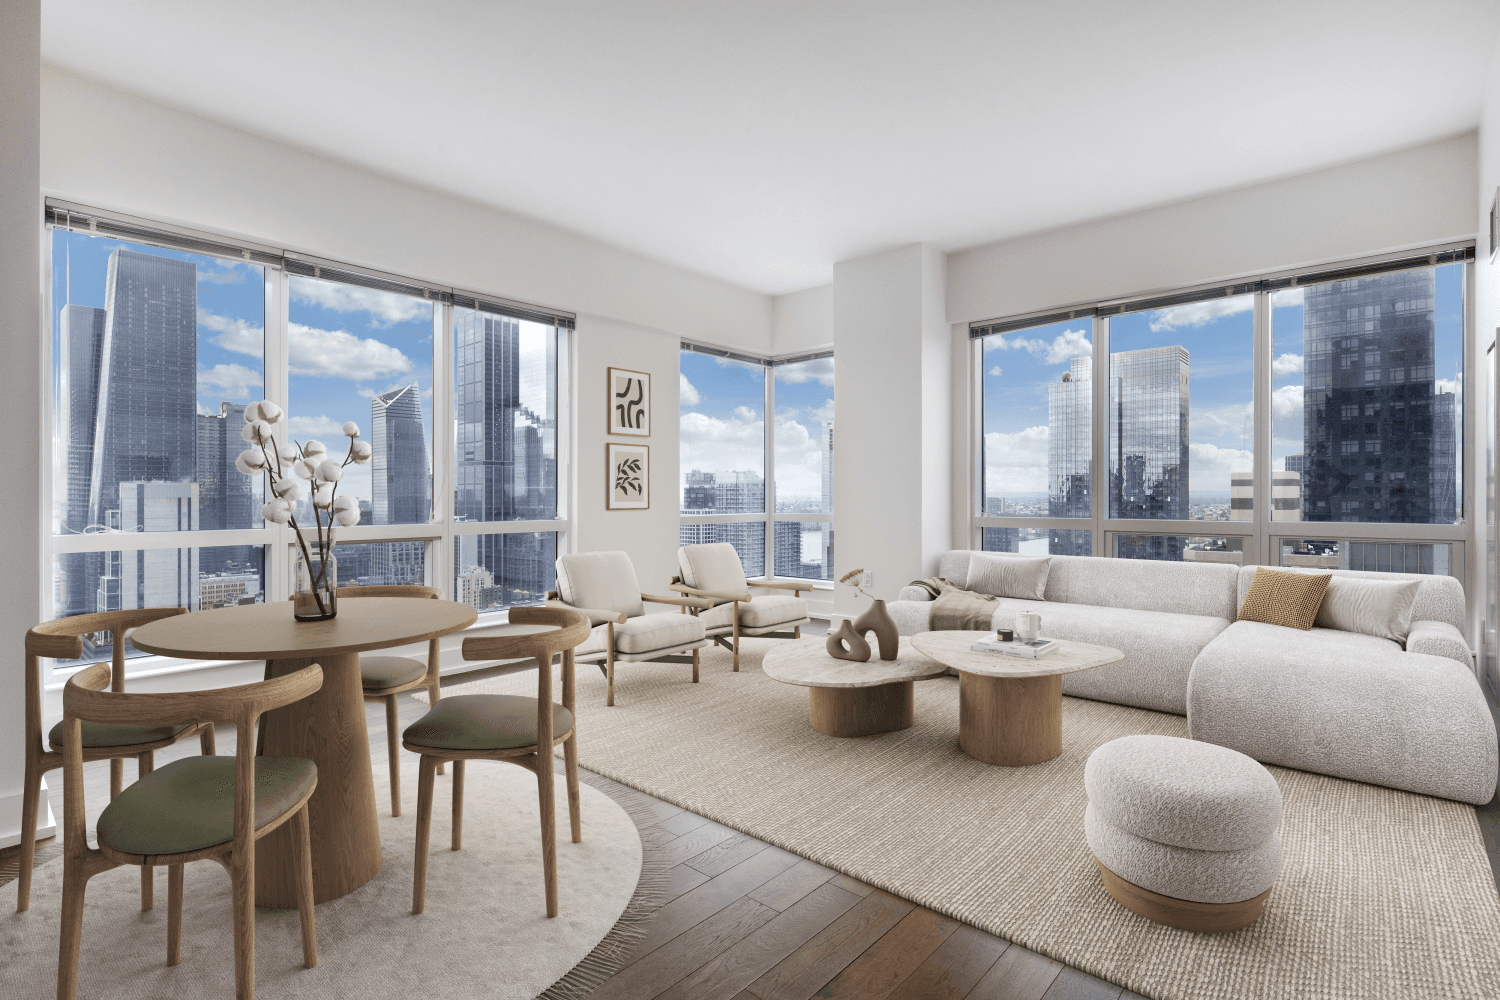 Residence 41A is a spacious 885 sqft 1 bedroom that towers above midtown with spectacular west views to the river and south to the Statue of Liberty.